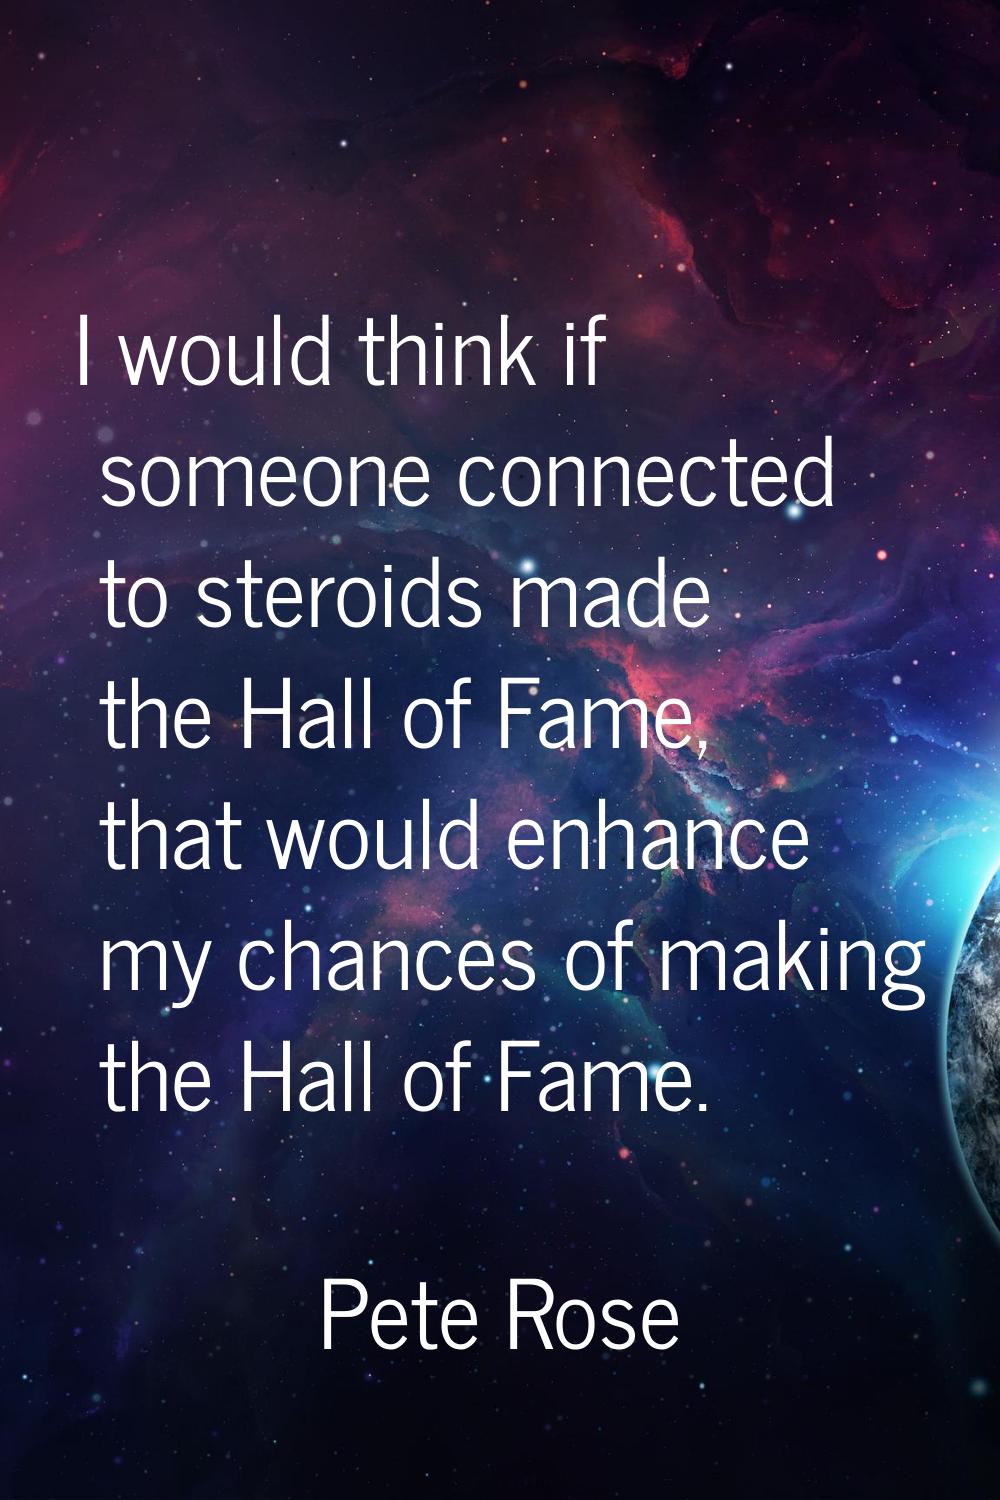 I would think if someone connected to steroids made the Hall of Fame, that would enhance my chances